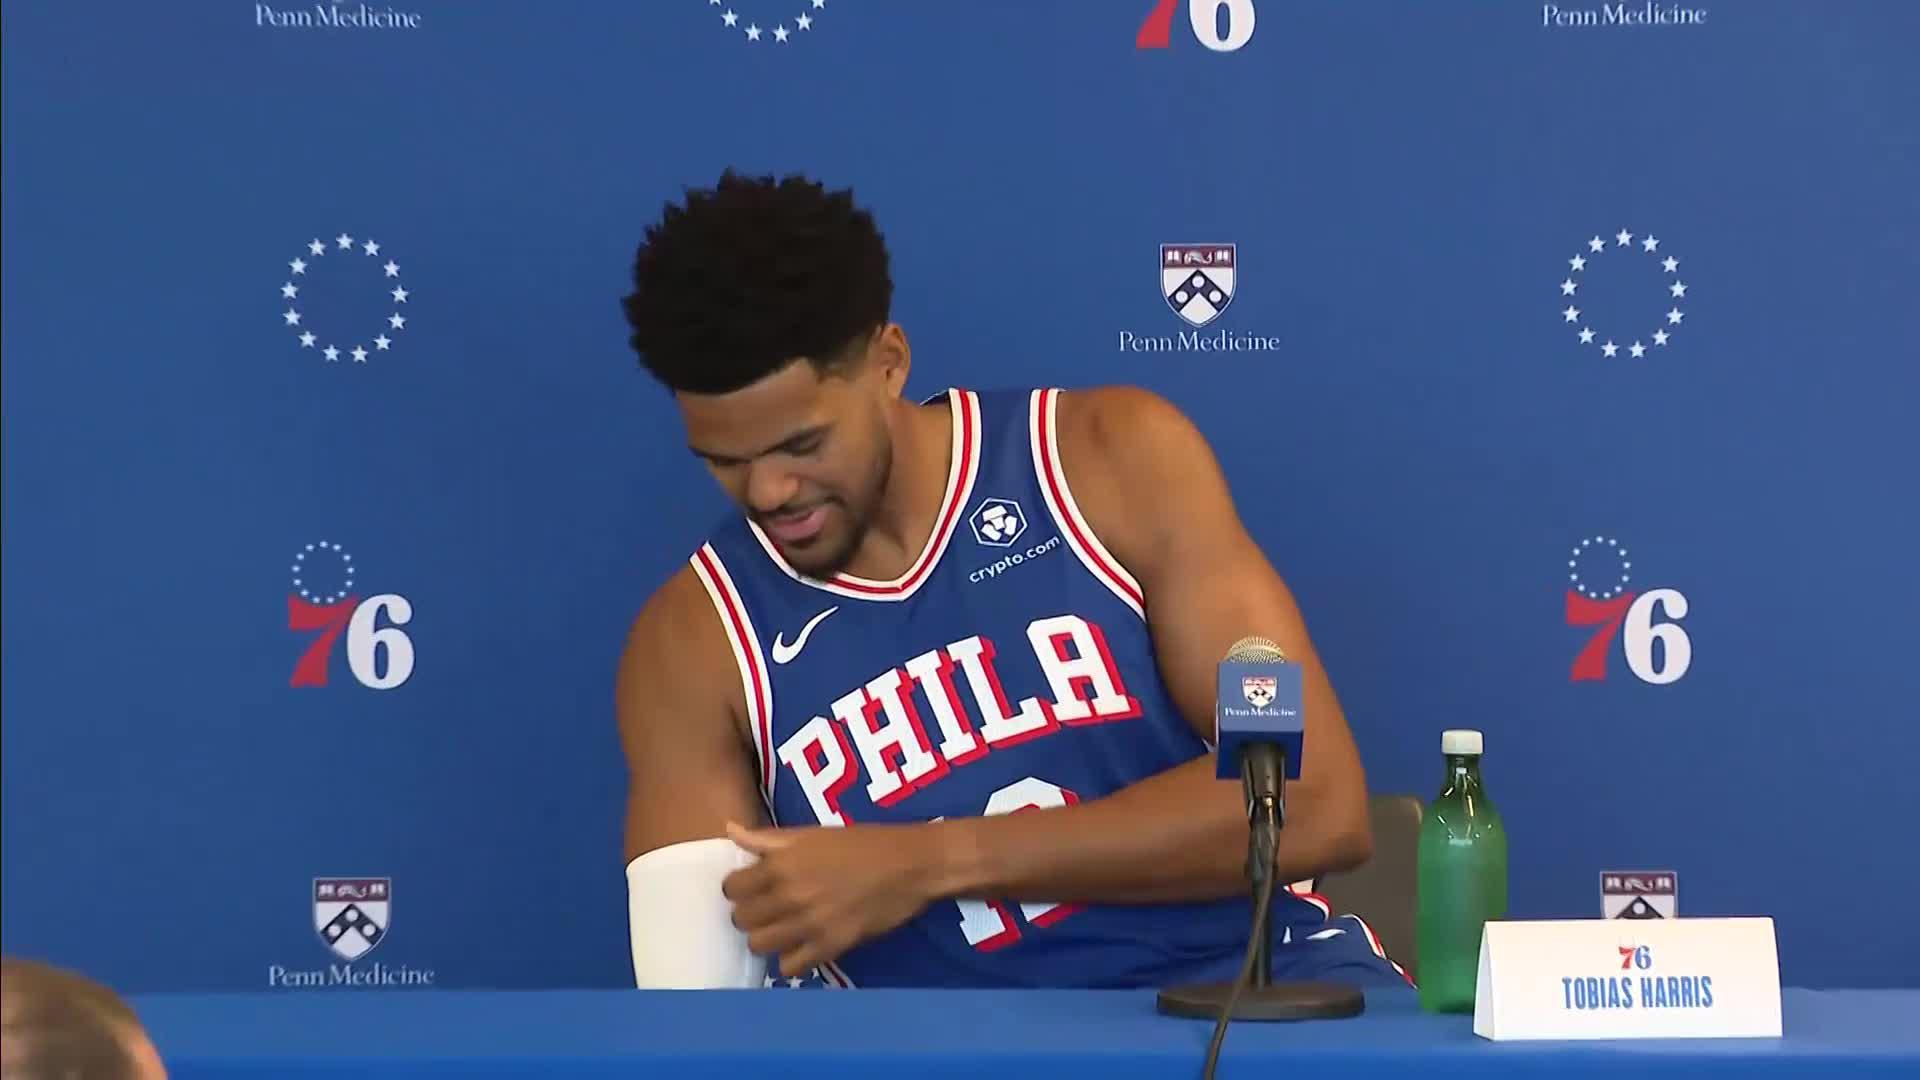 Sixers release 2022-23 City Edition uniforms that highlight 'Brotherly Love'  – NBC Sports Philadelphia